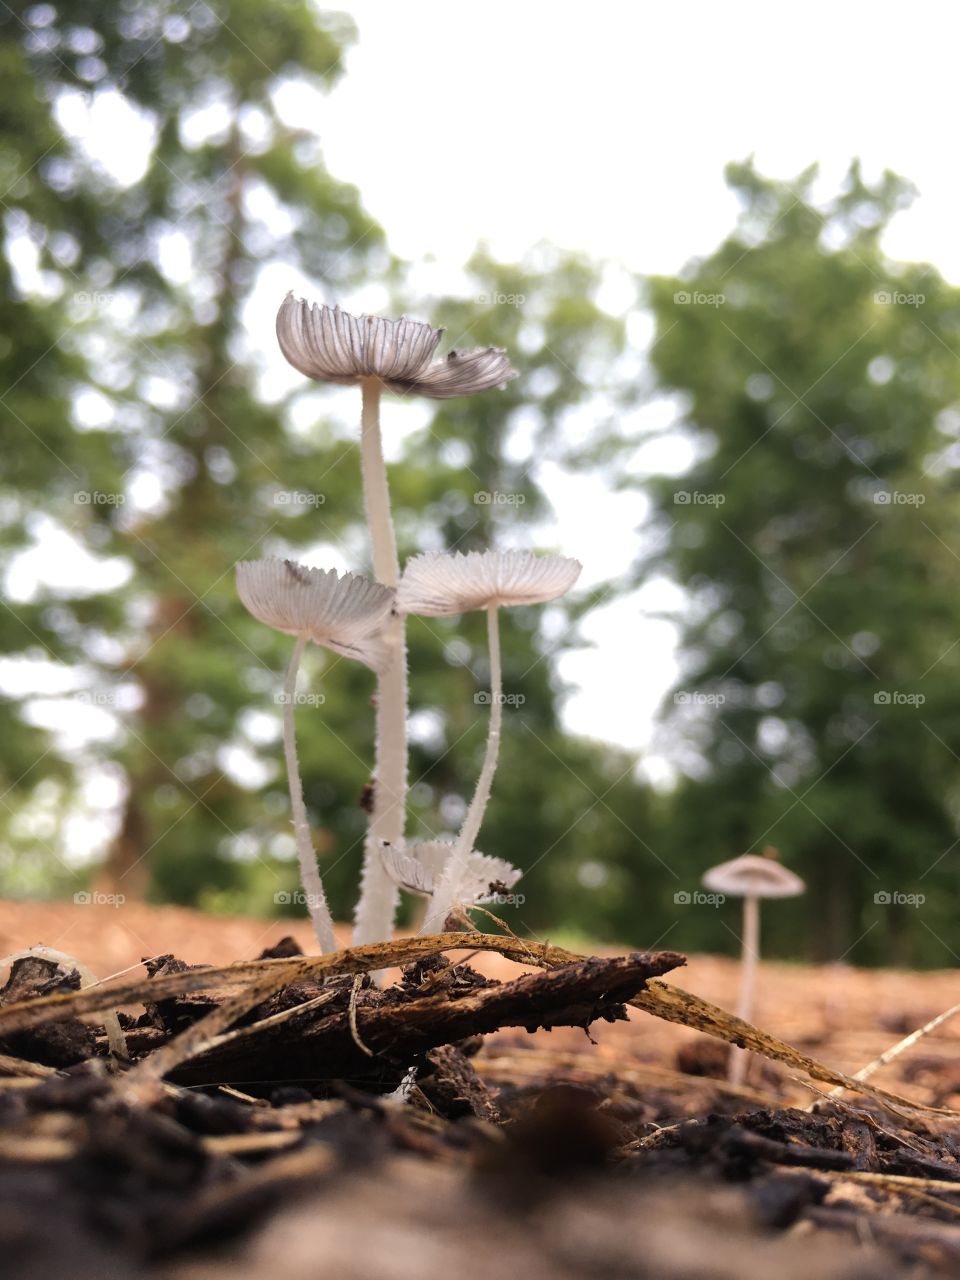 Delicate mushrooms growing on the rich forest floor